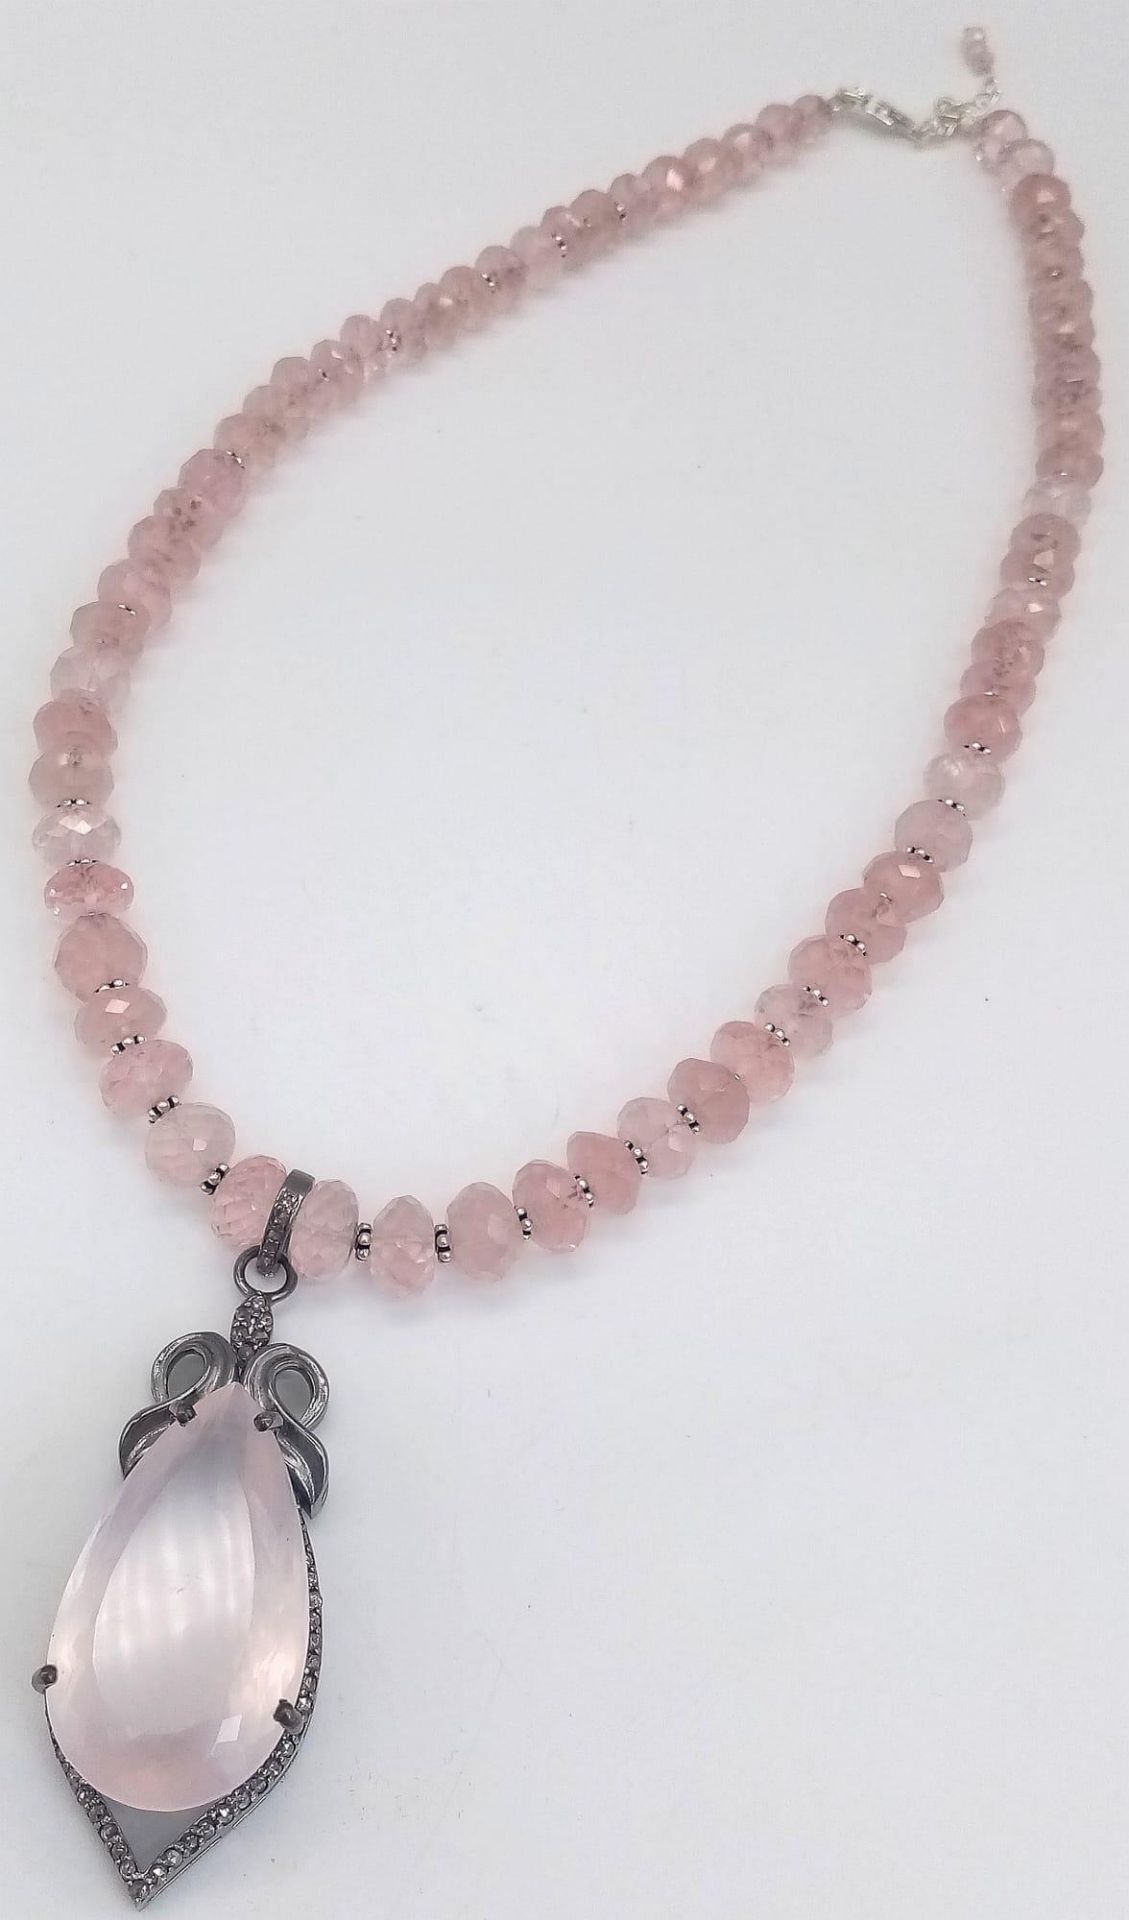 Rose Quartz Gemstone Necklace with Pendant with Diamonds on 925 Silver, The Pendant Comes with - Image 2 of 6